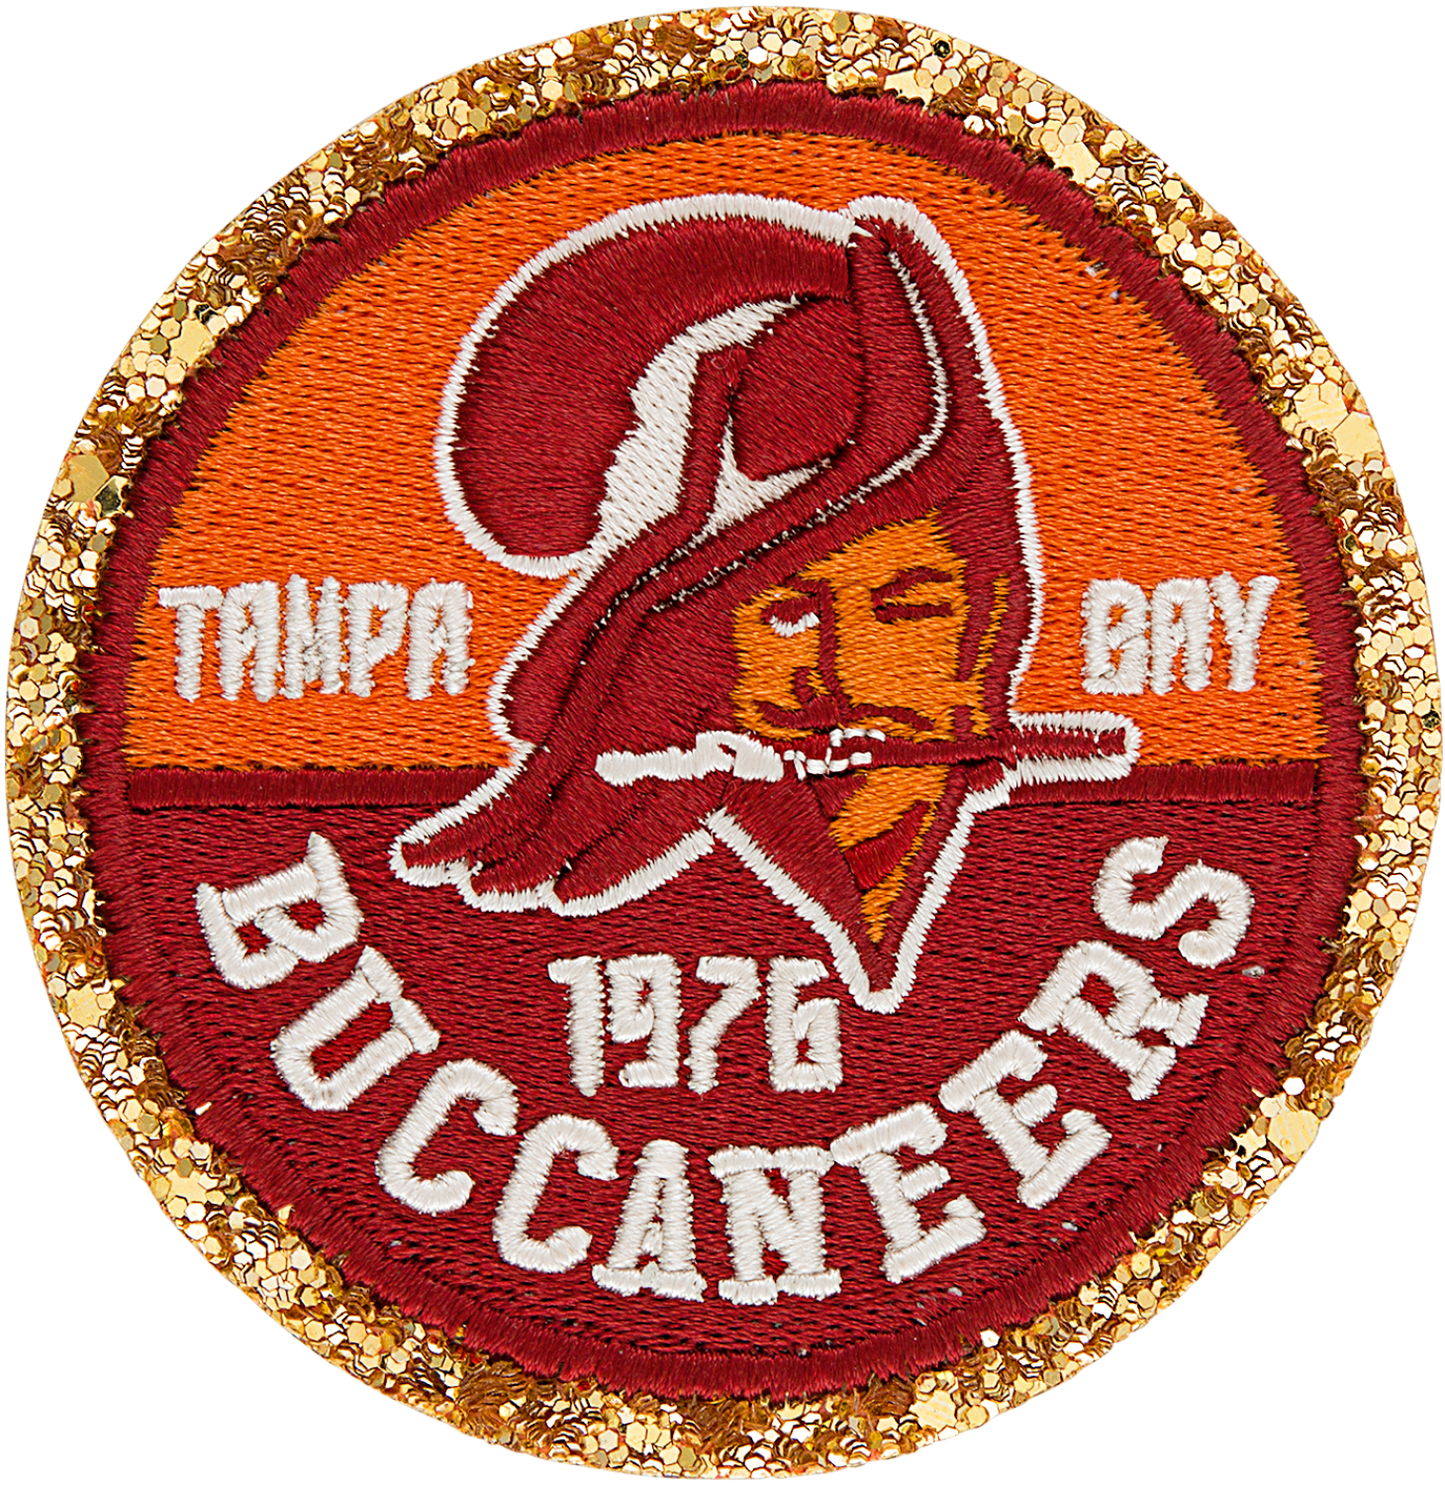 Tampa Bay Buccaneers Patch (Pre-Order)